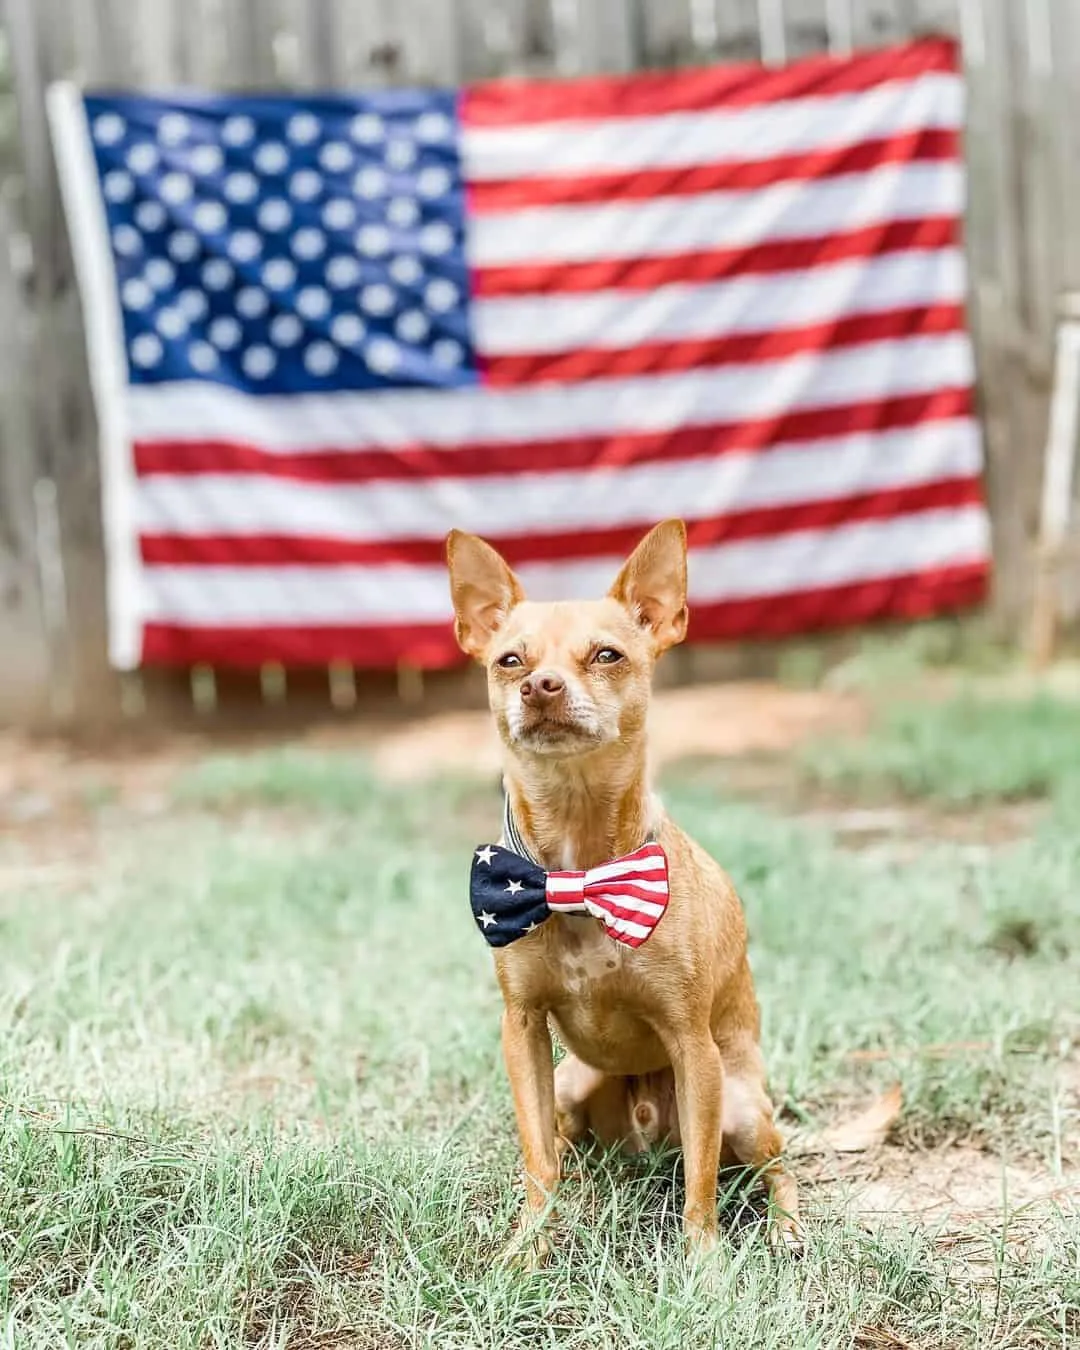 patriotic dog sitting on grass with flag in background